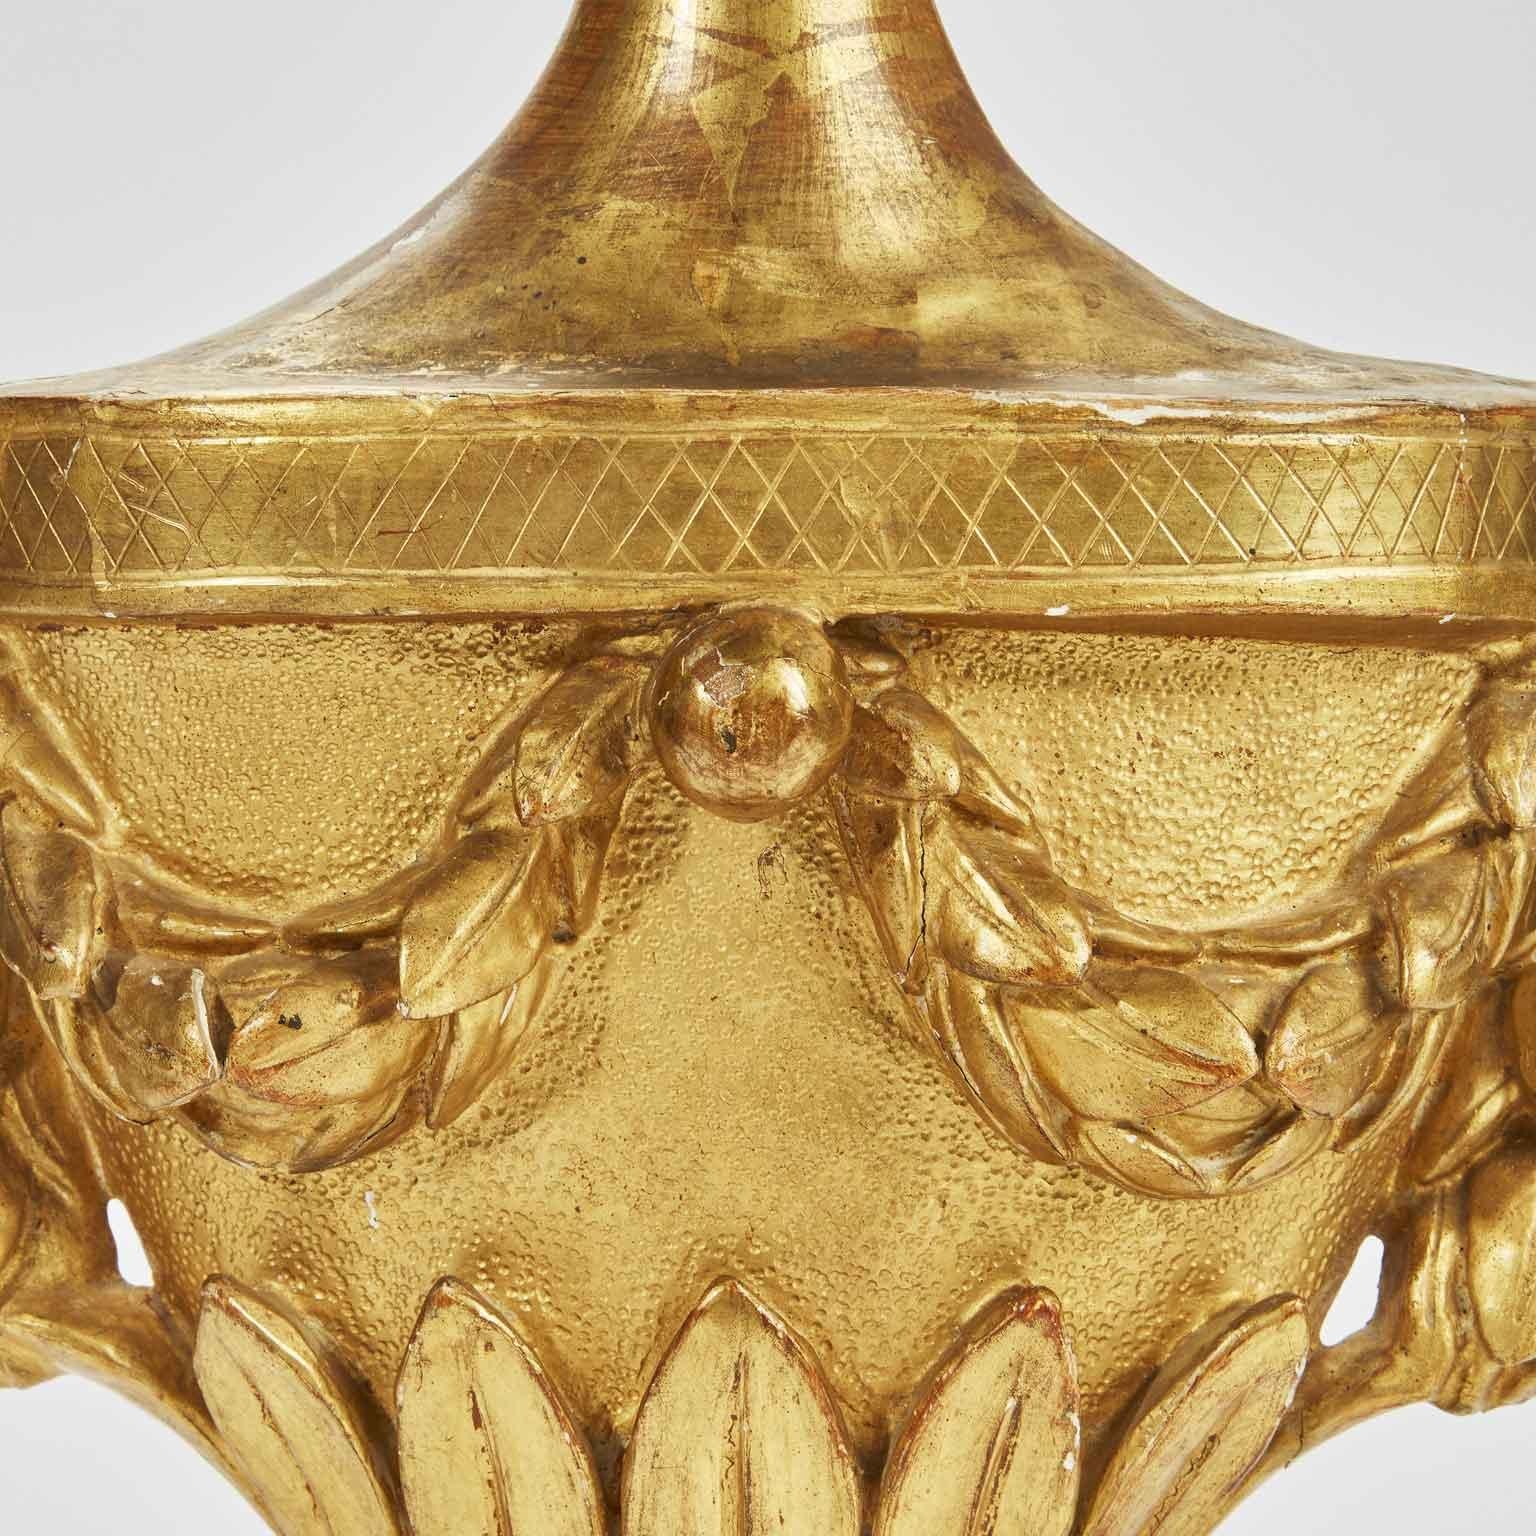 Gilded Empire Applique Lamp Late 1700s obtained from a carved wooden palm vase gilded in fine gold, converted into a wall sconce for use as a wall lamp. In the back of this lamp one can still see the marks of a shoulder, a support element that